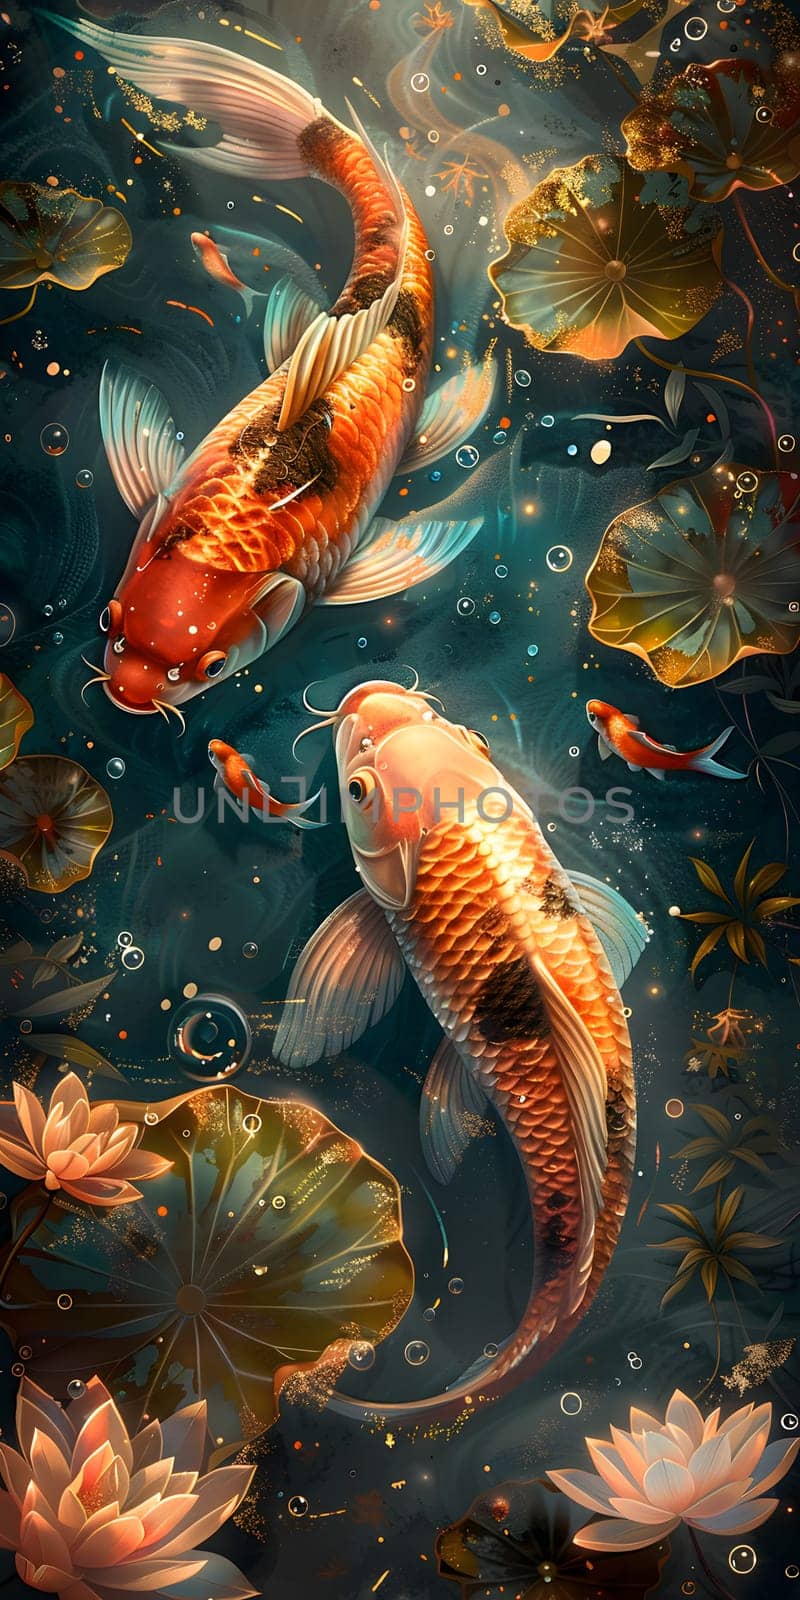 Three electric blue koi fish swim among water lilies in a pond by Nadtochiy